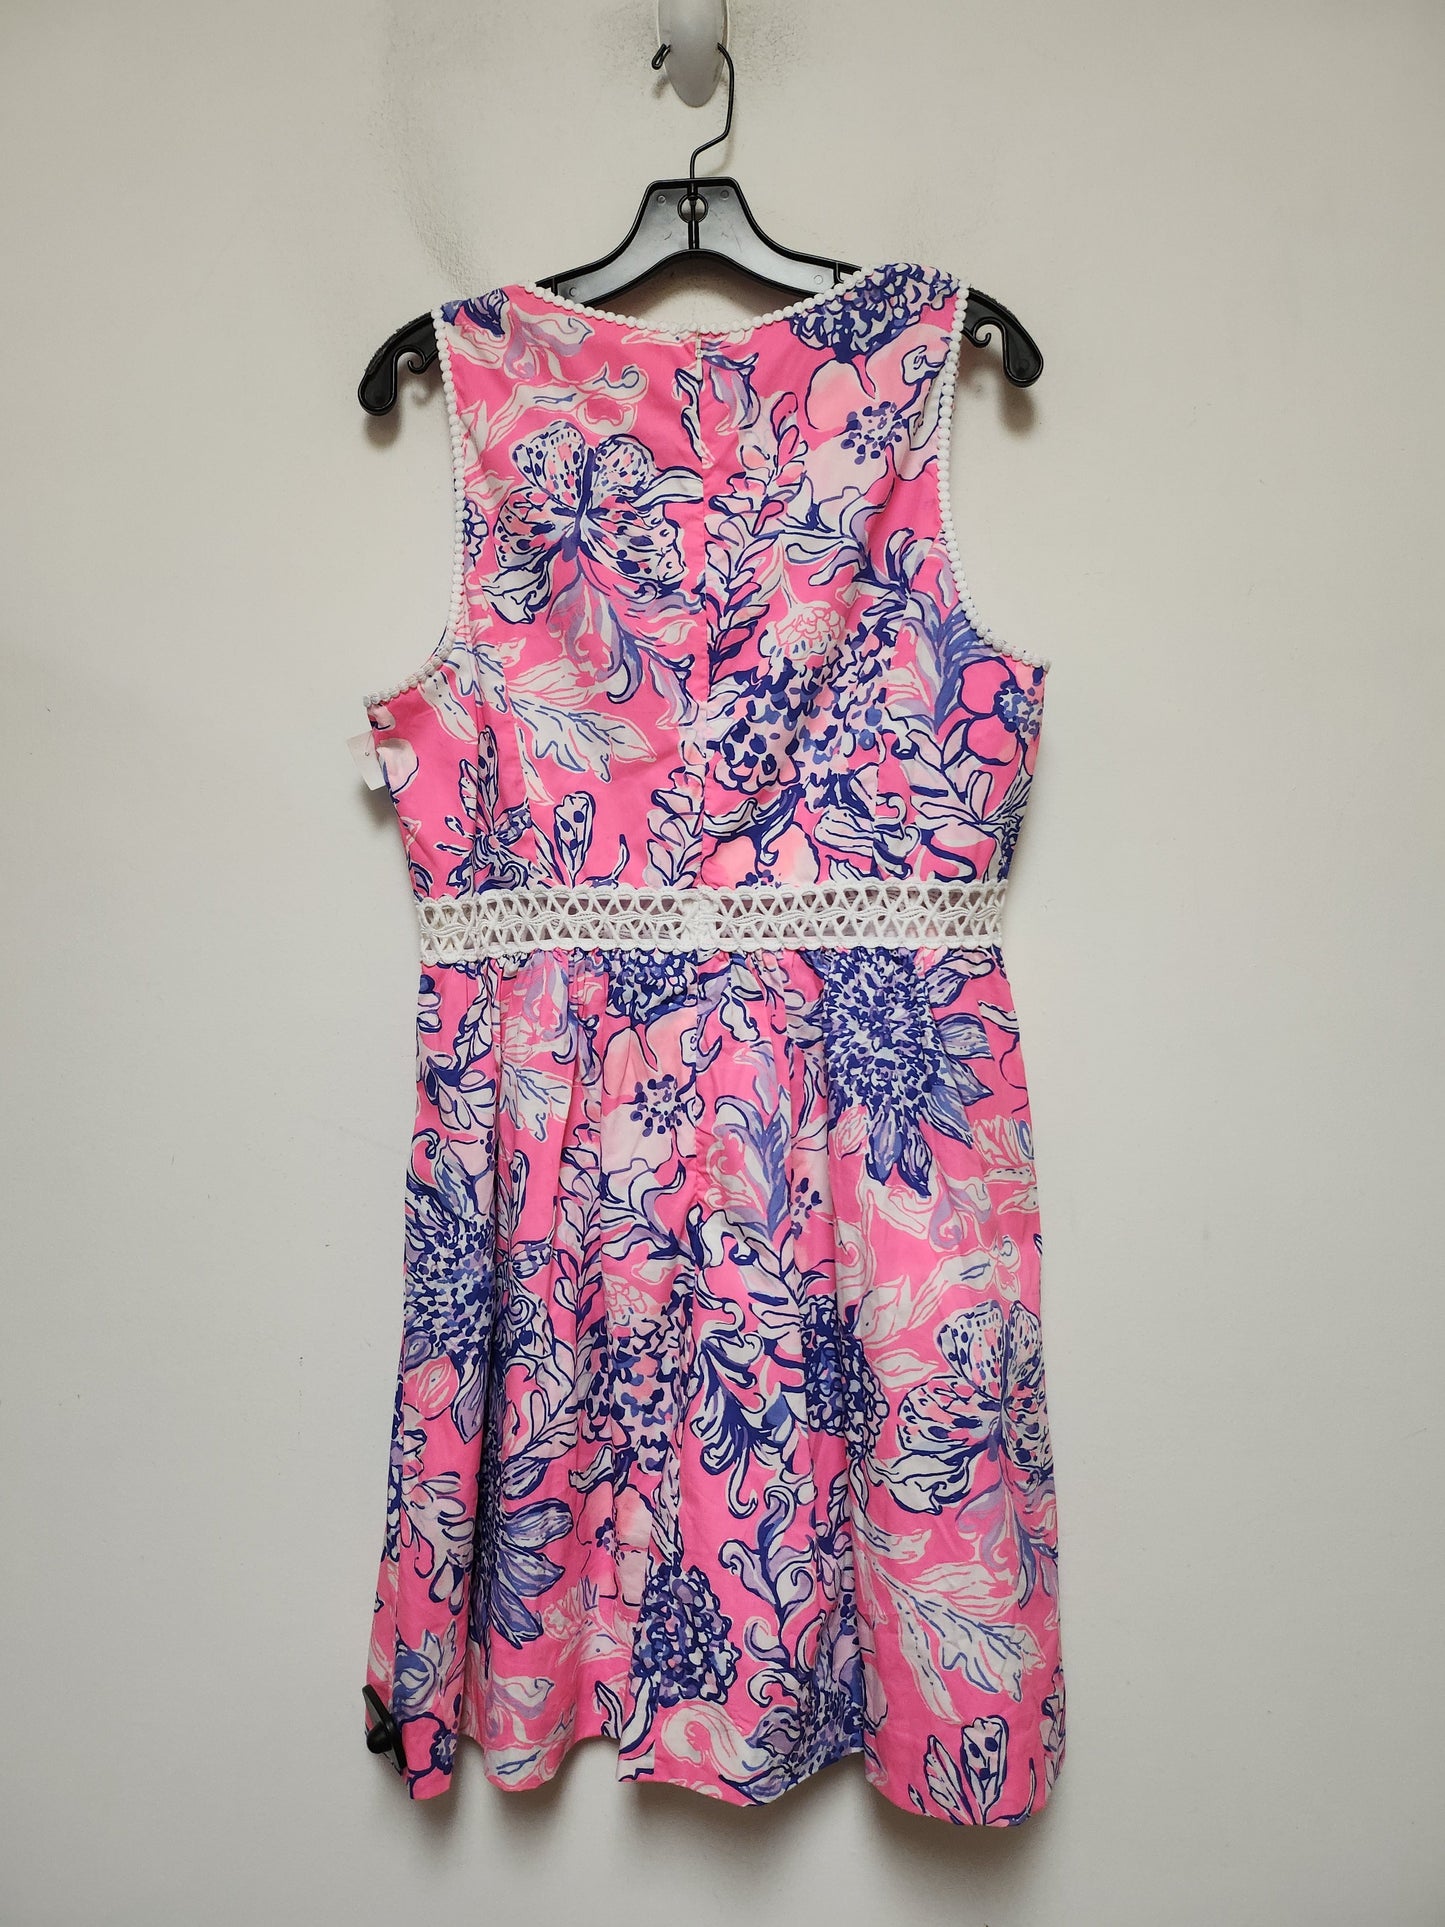 Floral Print Dress Casual Short Lilly Pulitzer, Size 12